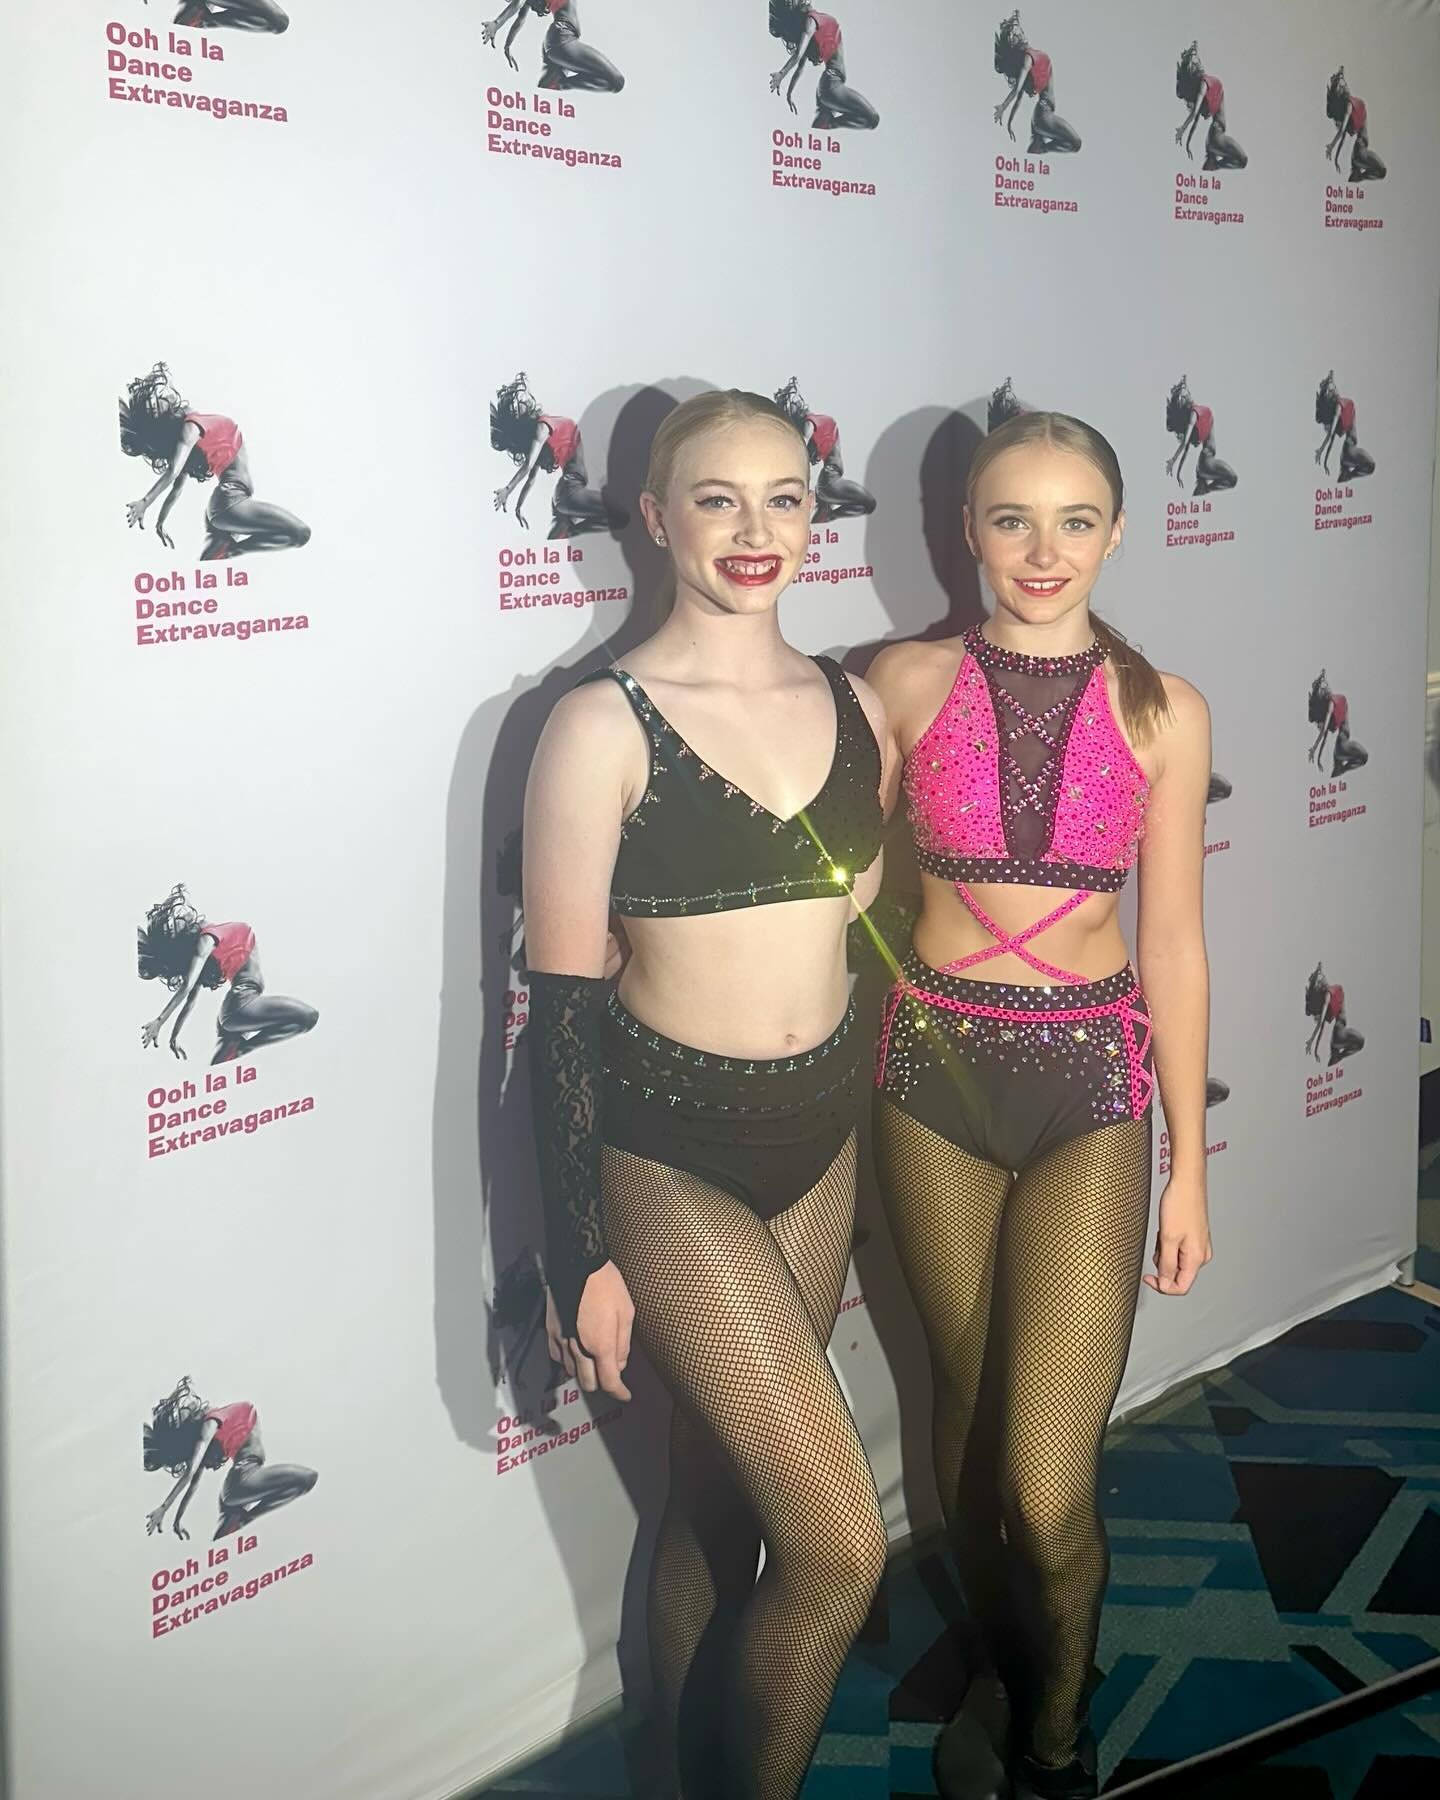 12 years and under today at @ooh_la_la_dance_extravaganza - Tahlia and Naya danced beautifully up on that stage! 
We are so proud of you both 🥰

Tahlia:
🥇 Classical Ballet 
🥇 Demi Character
🥇 Jazz
🥇 Lyrical 
🥇 Broadway 
🥇 Student Choreography 